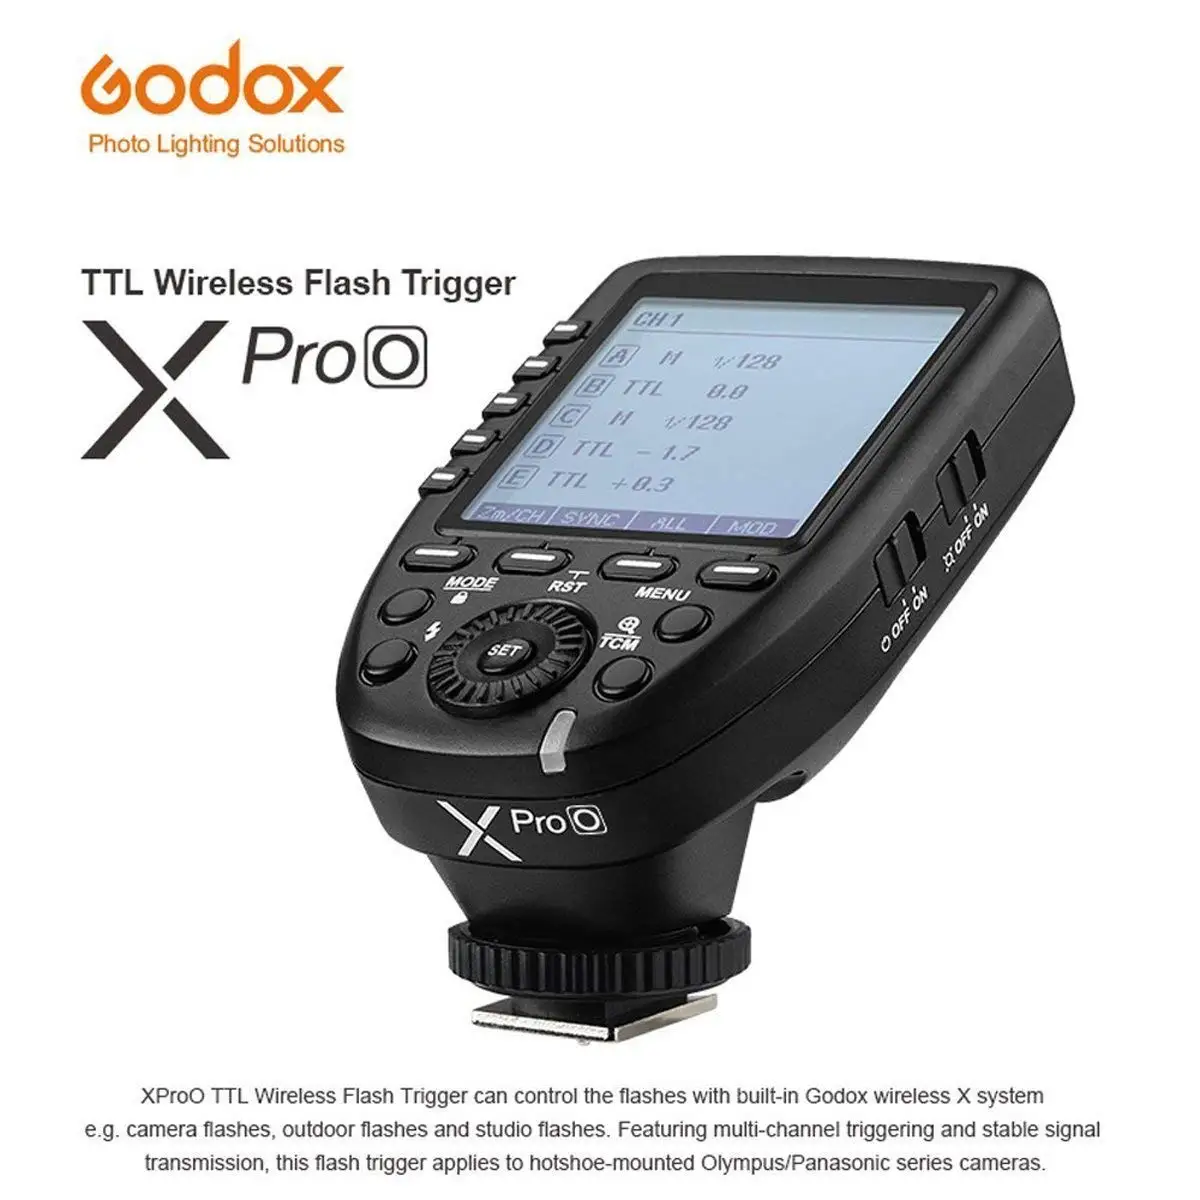 Xpro Xpro C N O S F P 2 4g Ttl Flash Wireless Transmitter Trigger X System Hss 1 8000s For Canon Nikon Olympus Fuji Buy Xpro Flash Trigger Wireless Transmitter X System Wireless Flash Trigger Xpro Product On Alibaba Com